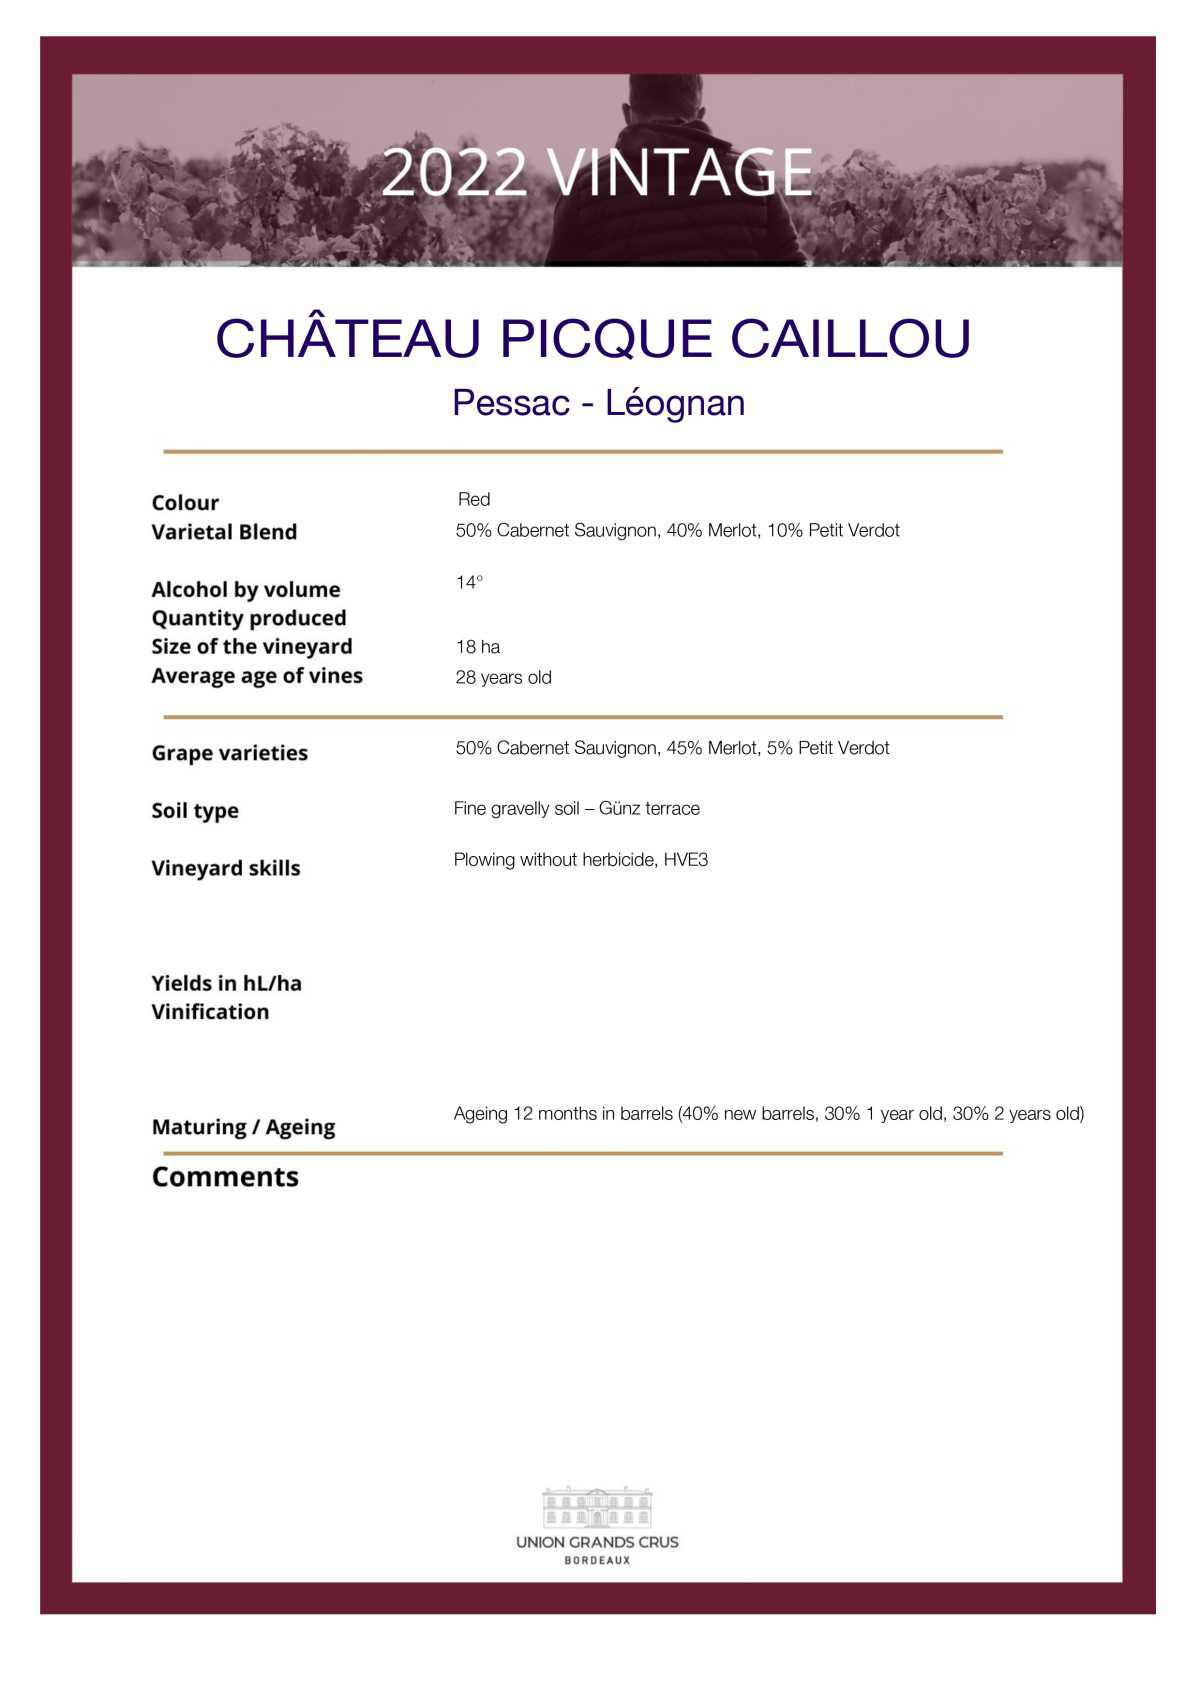  Château Picque Caillou - Red